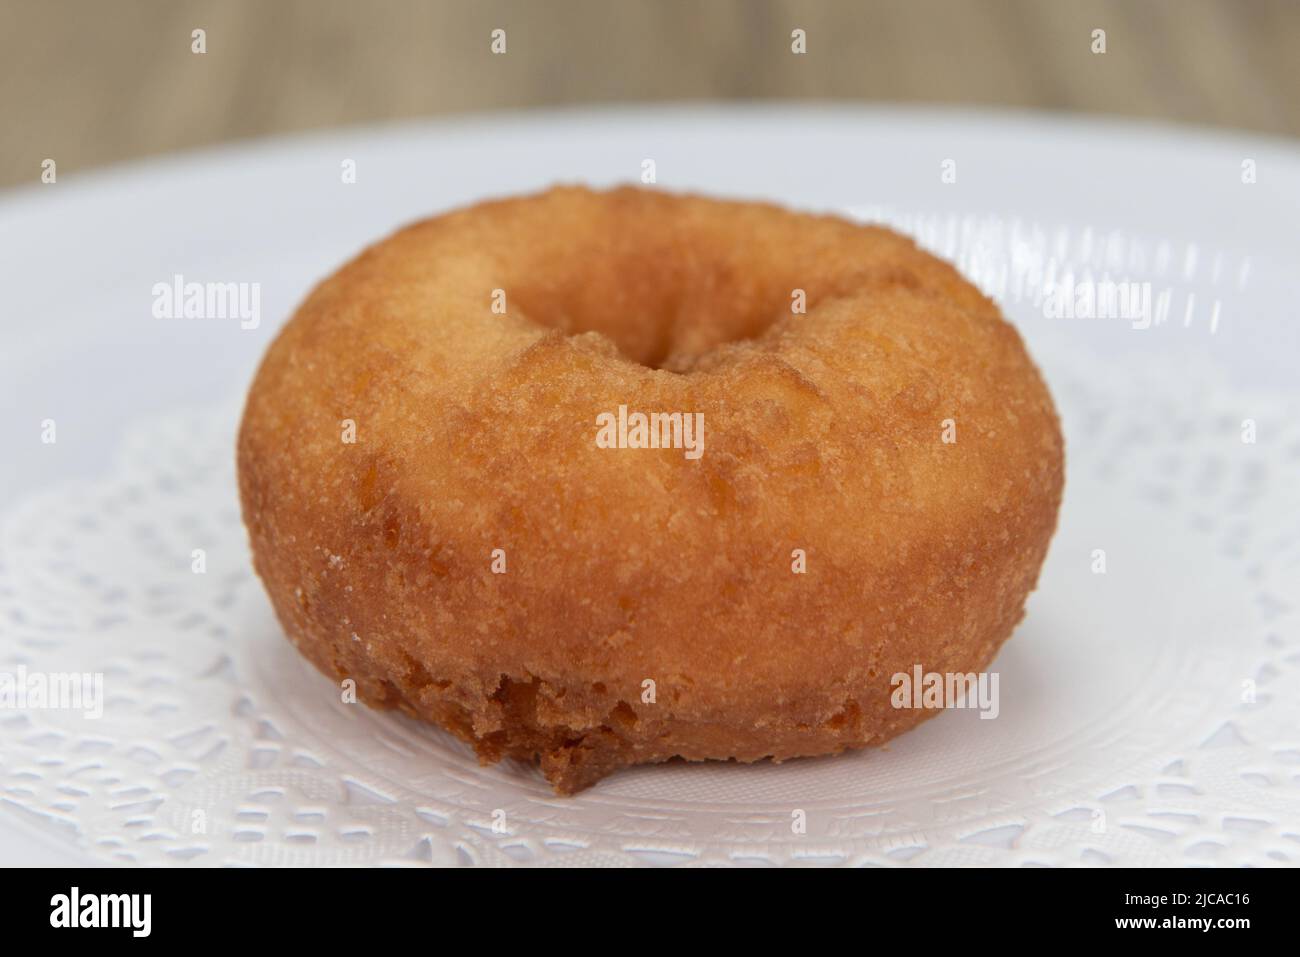 Tempting fresh from the oven plain donut from the bakery served on a plate. Stock Photo